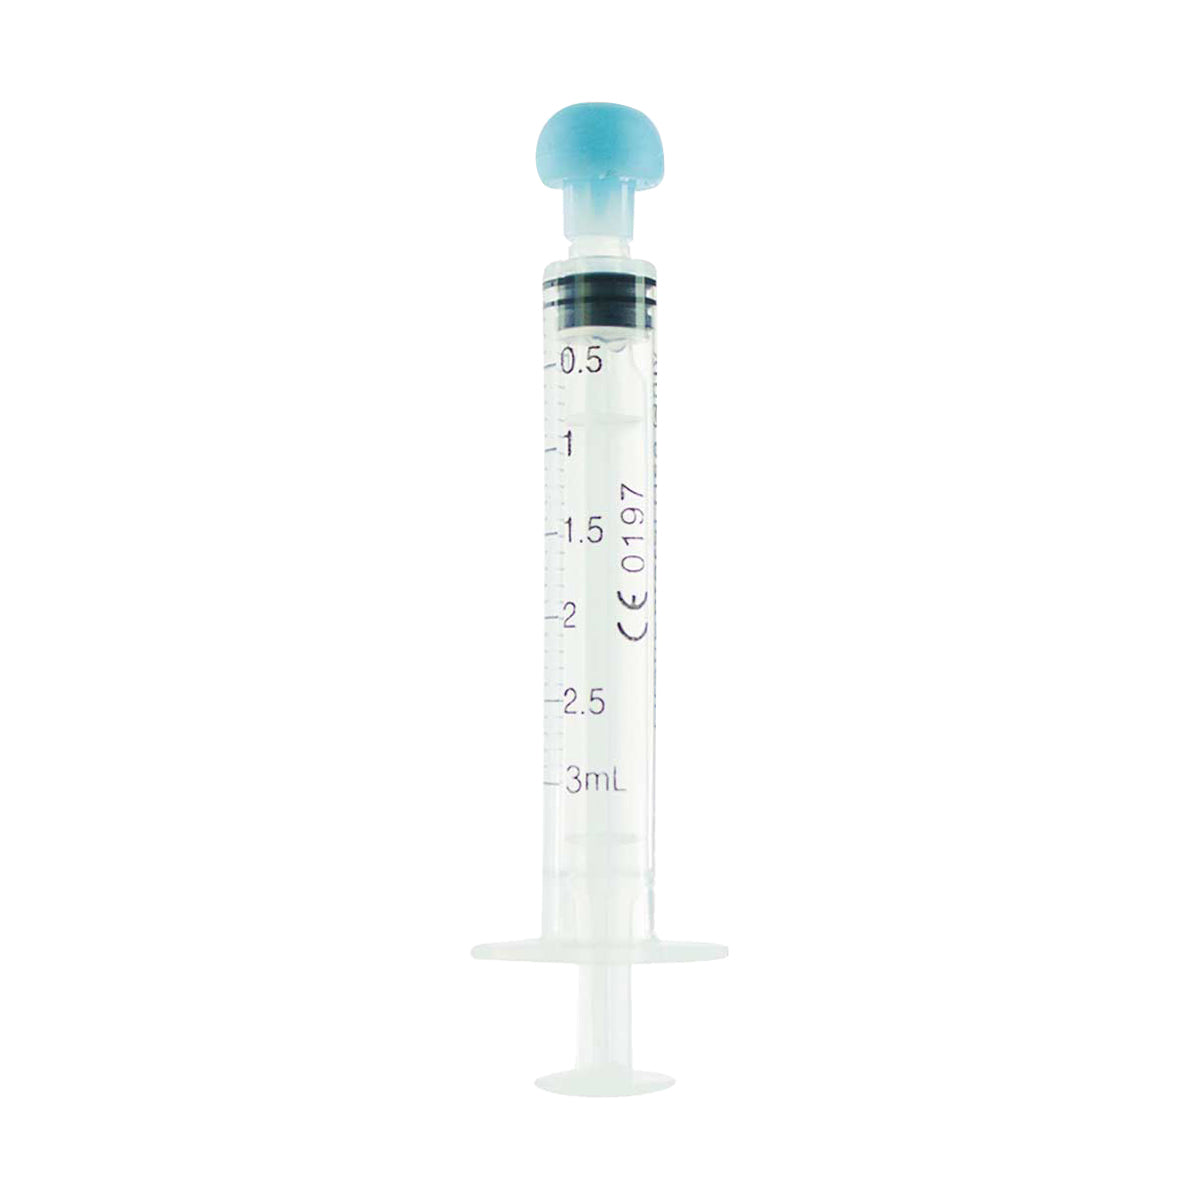 Concentrate Syringe | Oral Concentrate Syringes | 3mL -  0.5mL Increments - 100 Count Syringe Biohazard Inc   